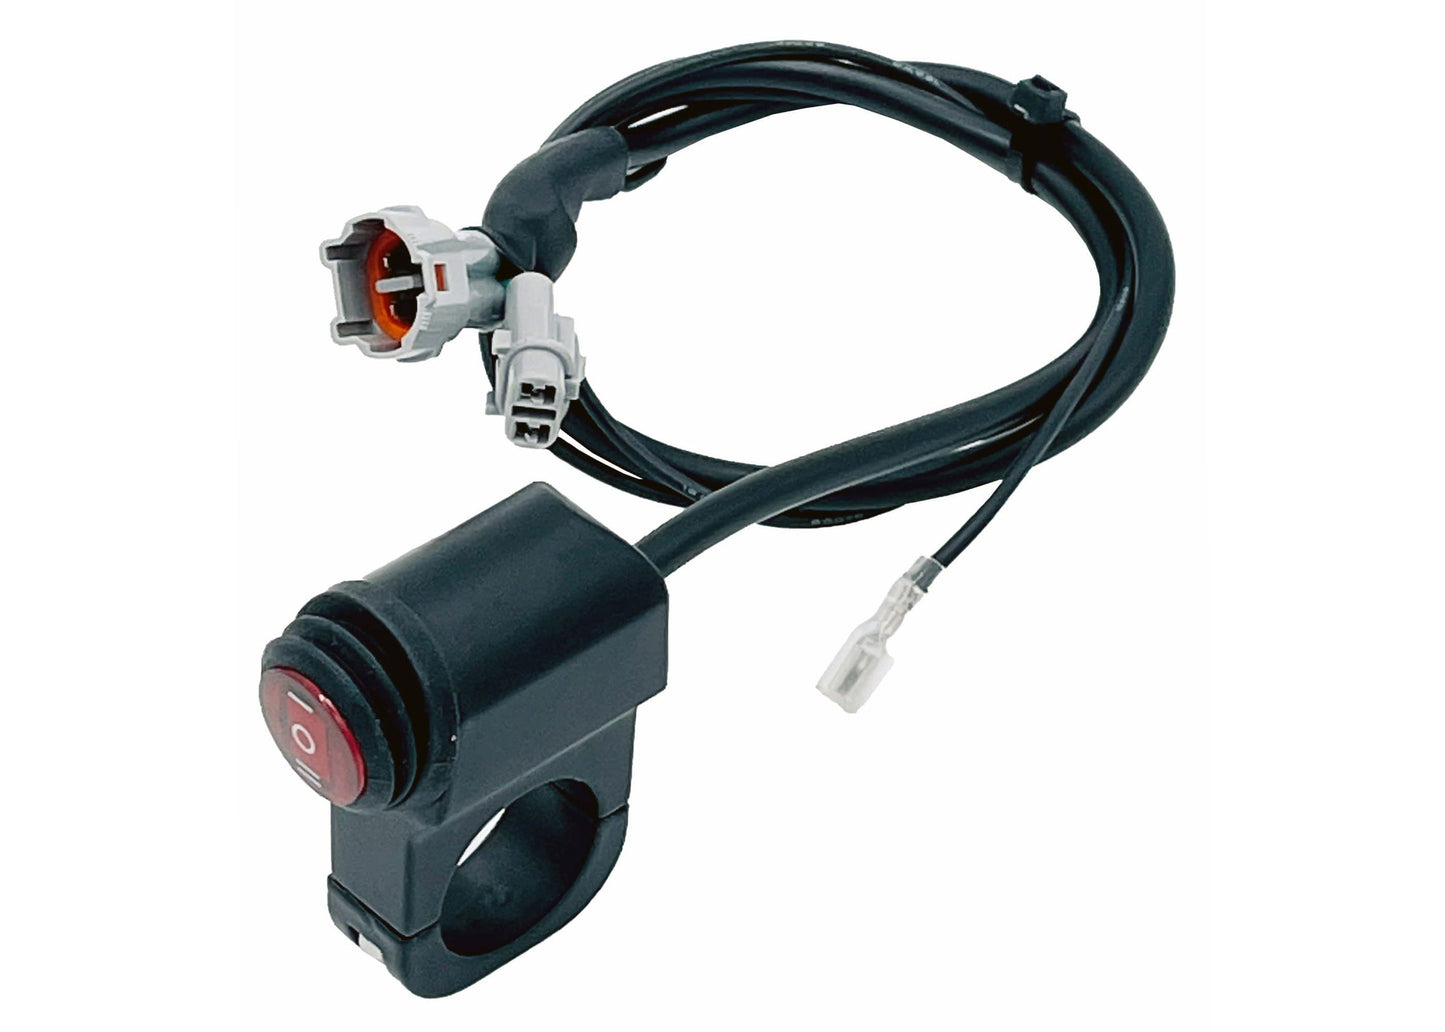 GritShift Duster Headlight & Taillight Kill Switch - GritShift